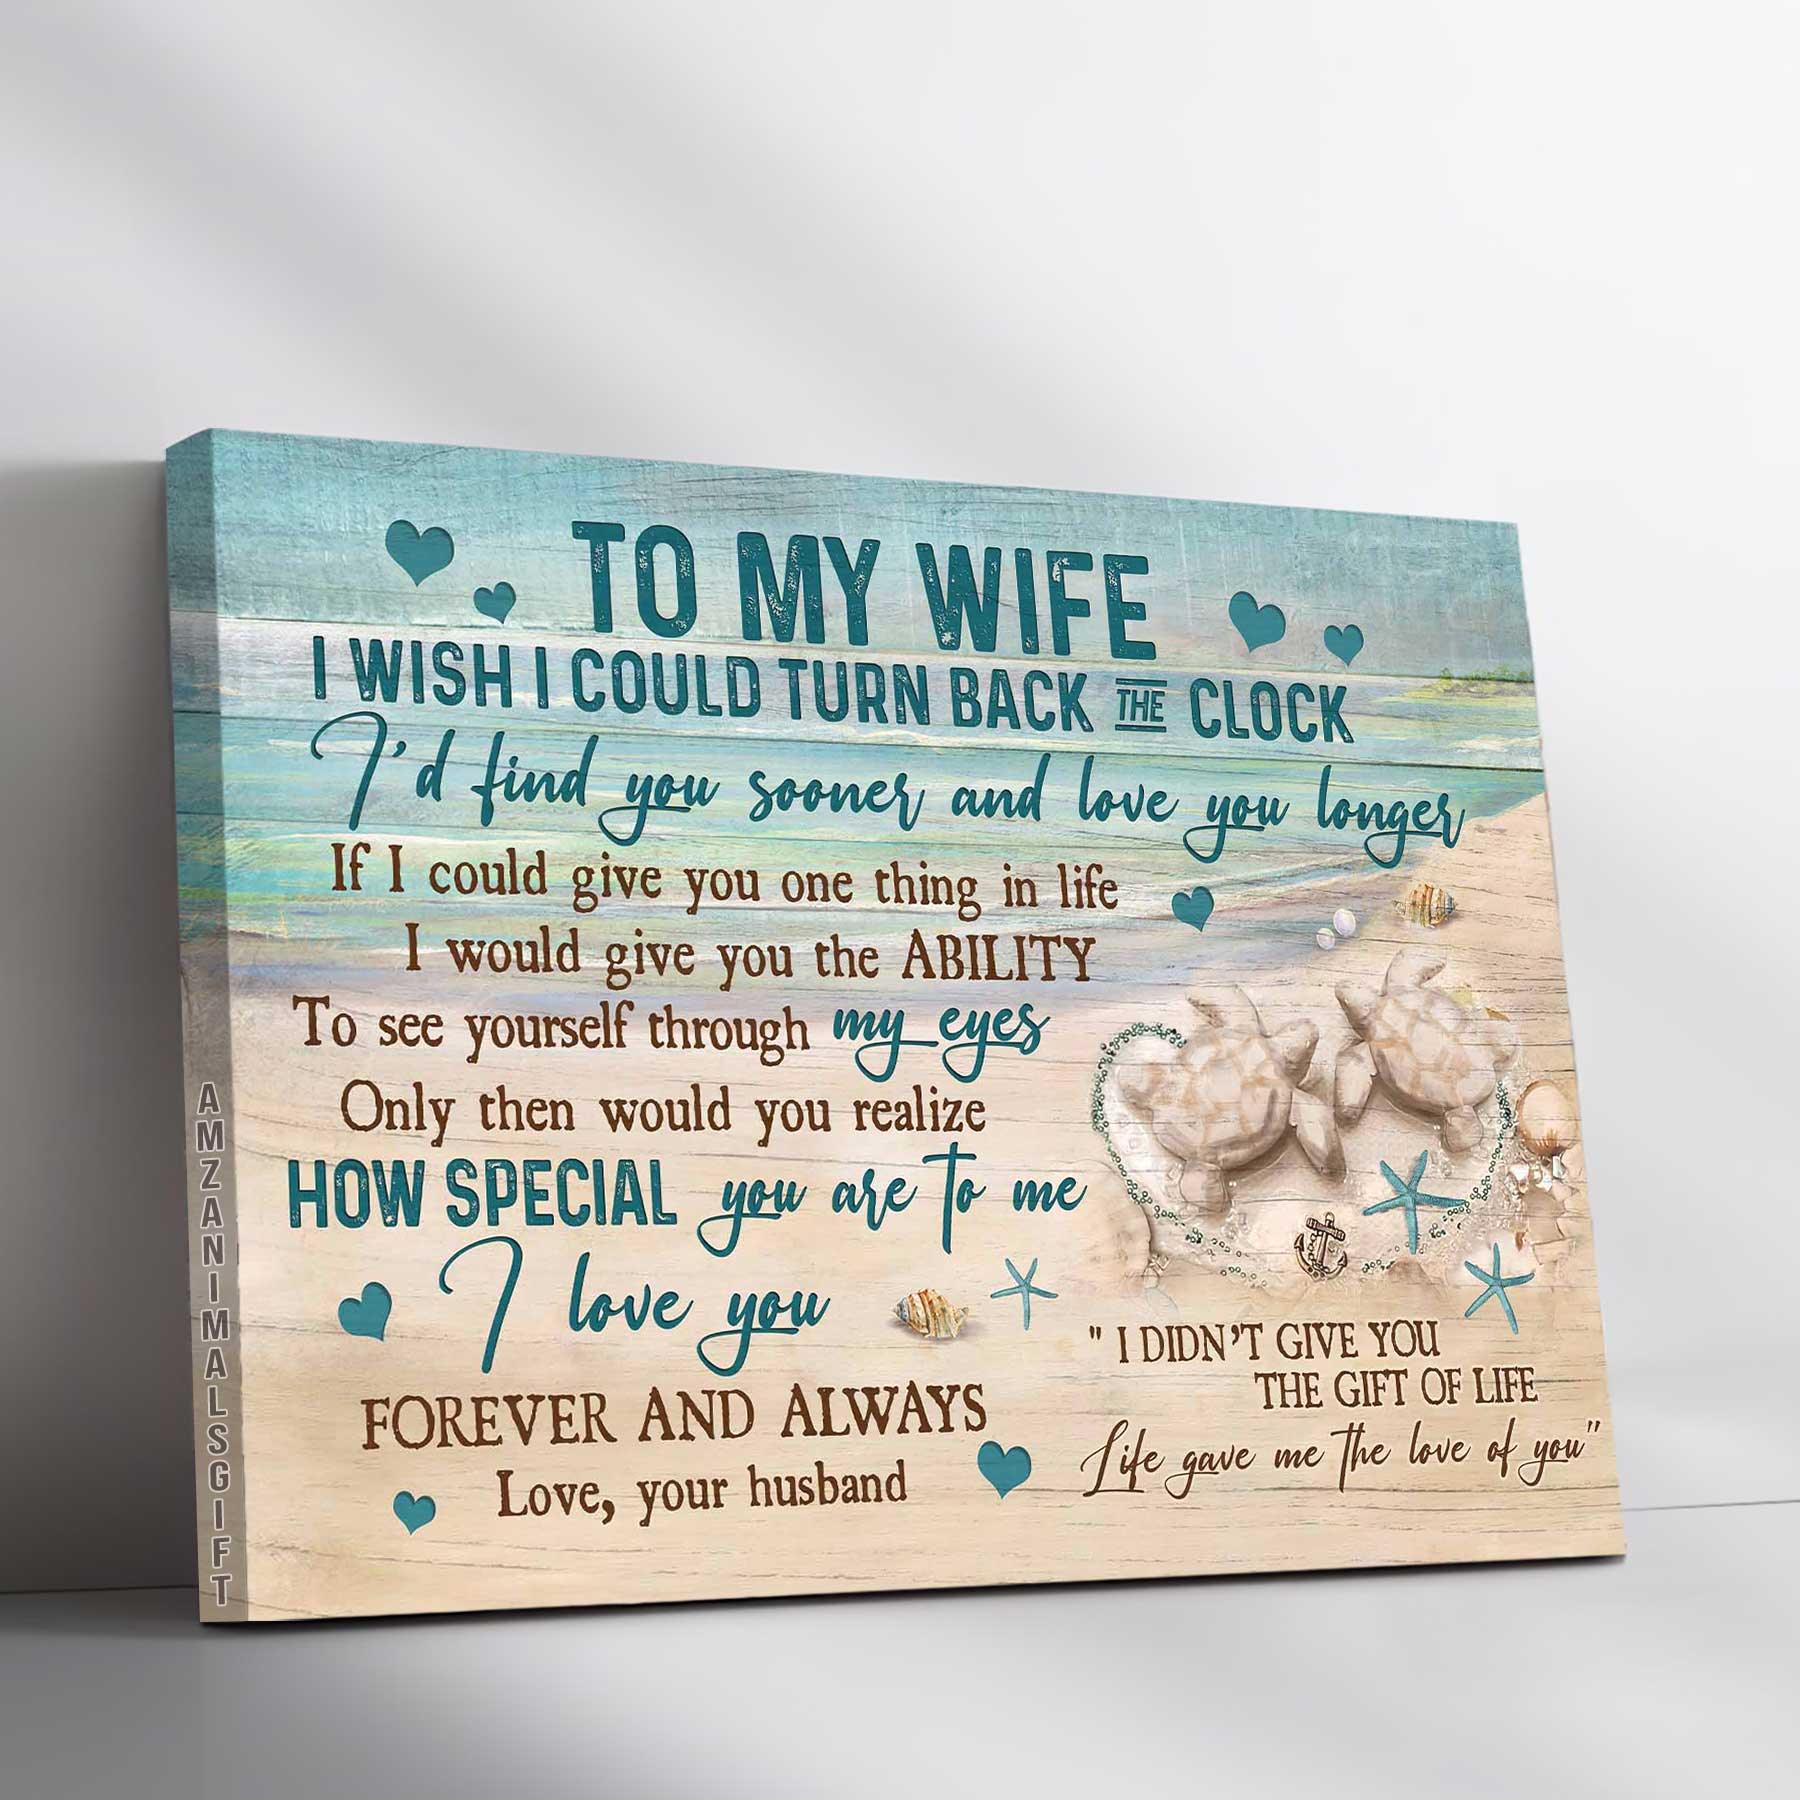 Couple Premium Wrapped Landscape Canvas - To My Wife, Sand Turtle, Sand Beach, Life Gave Me The Love Of You - Perfect Gift For Wife, Couple, Spouse - Amzanimalsgift